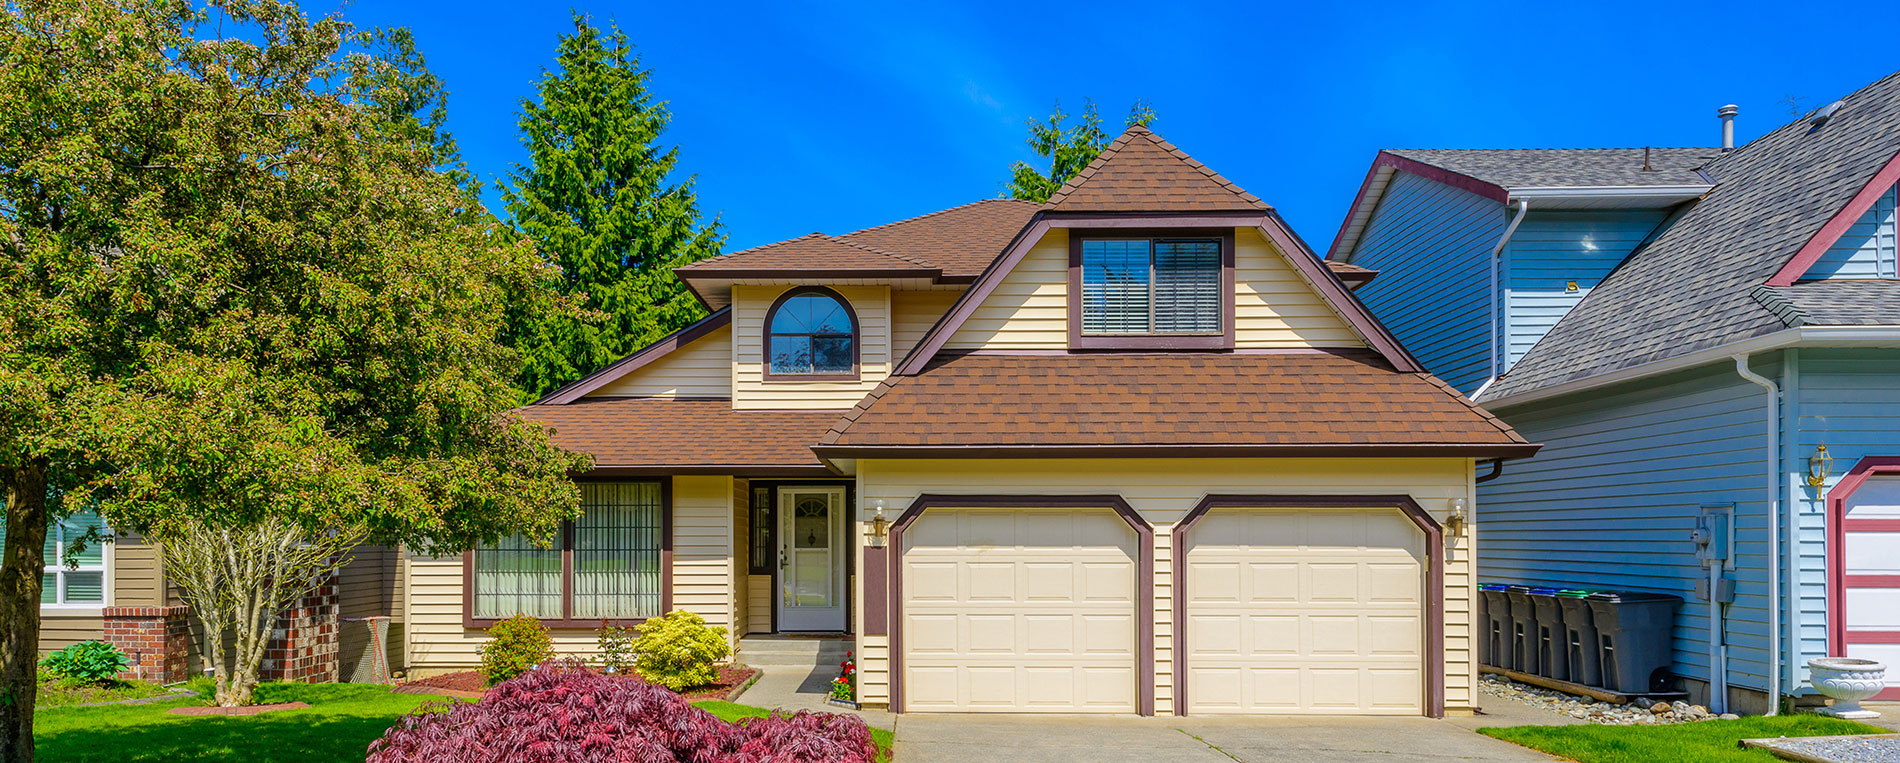 Tips On Caring for Your Garage Door